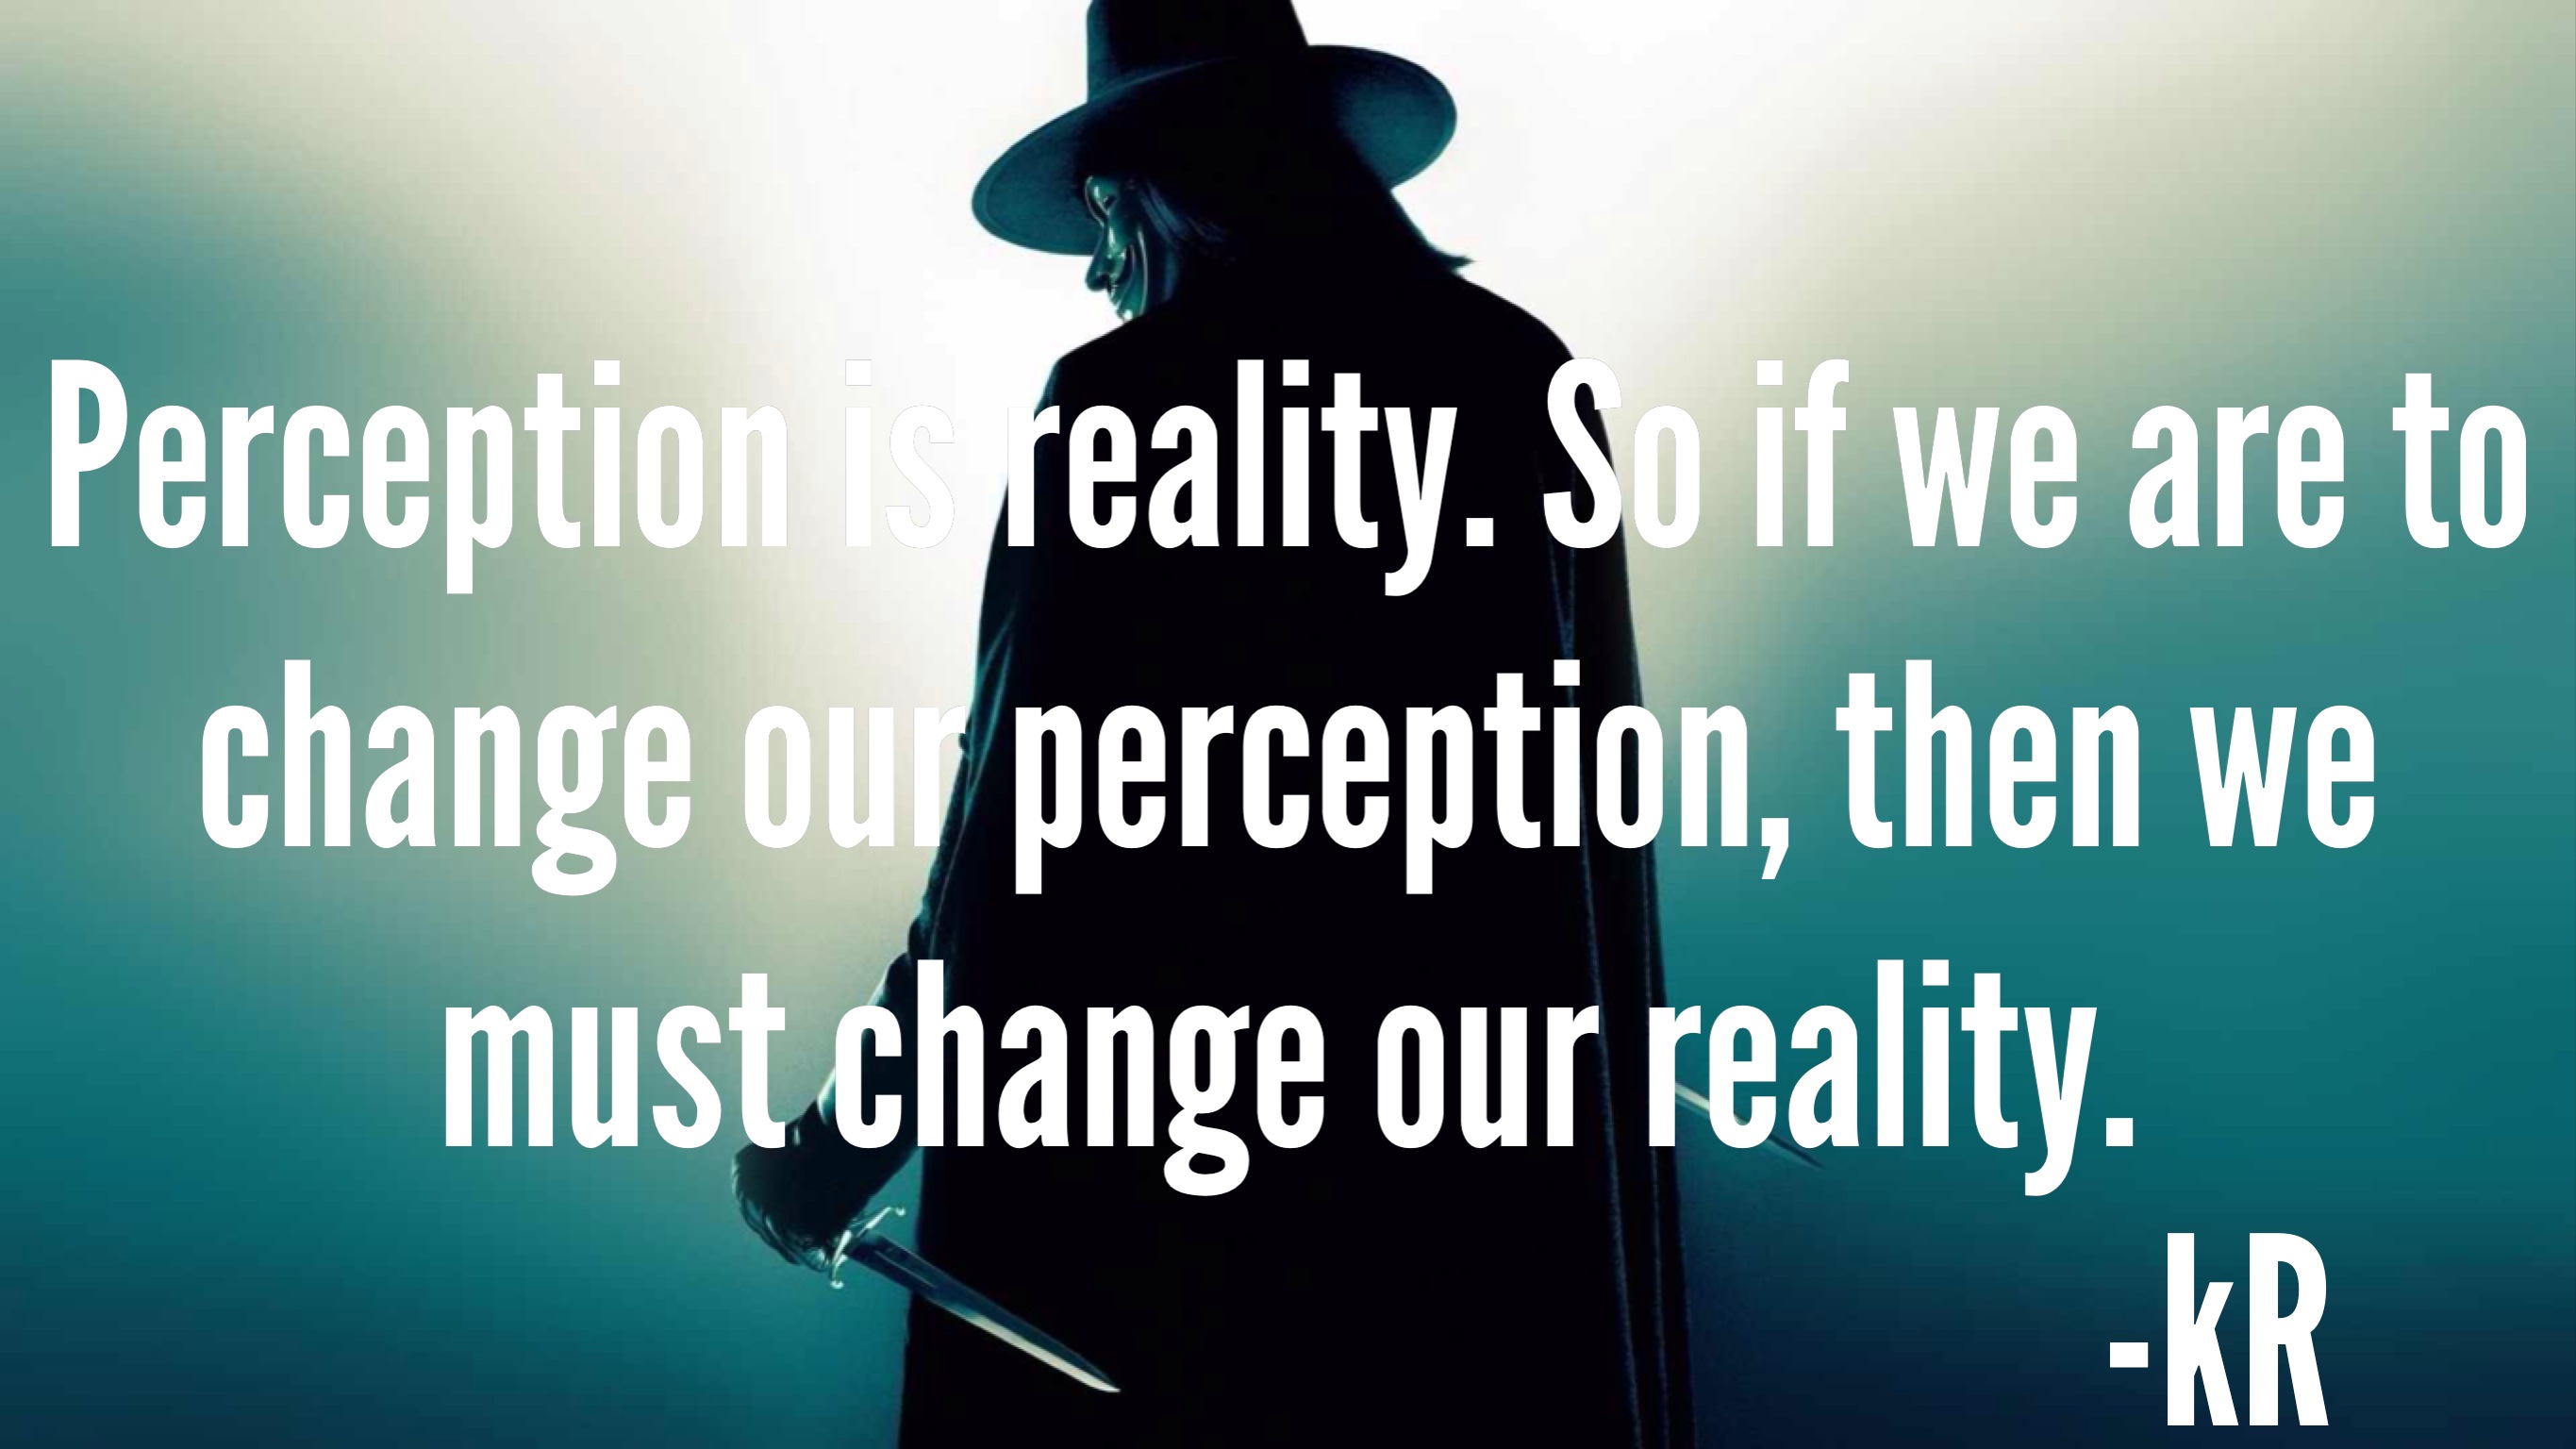 Perception Is Reality. So if we are to change our perception, then we must change our reality